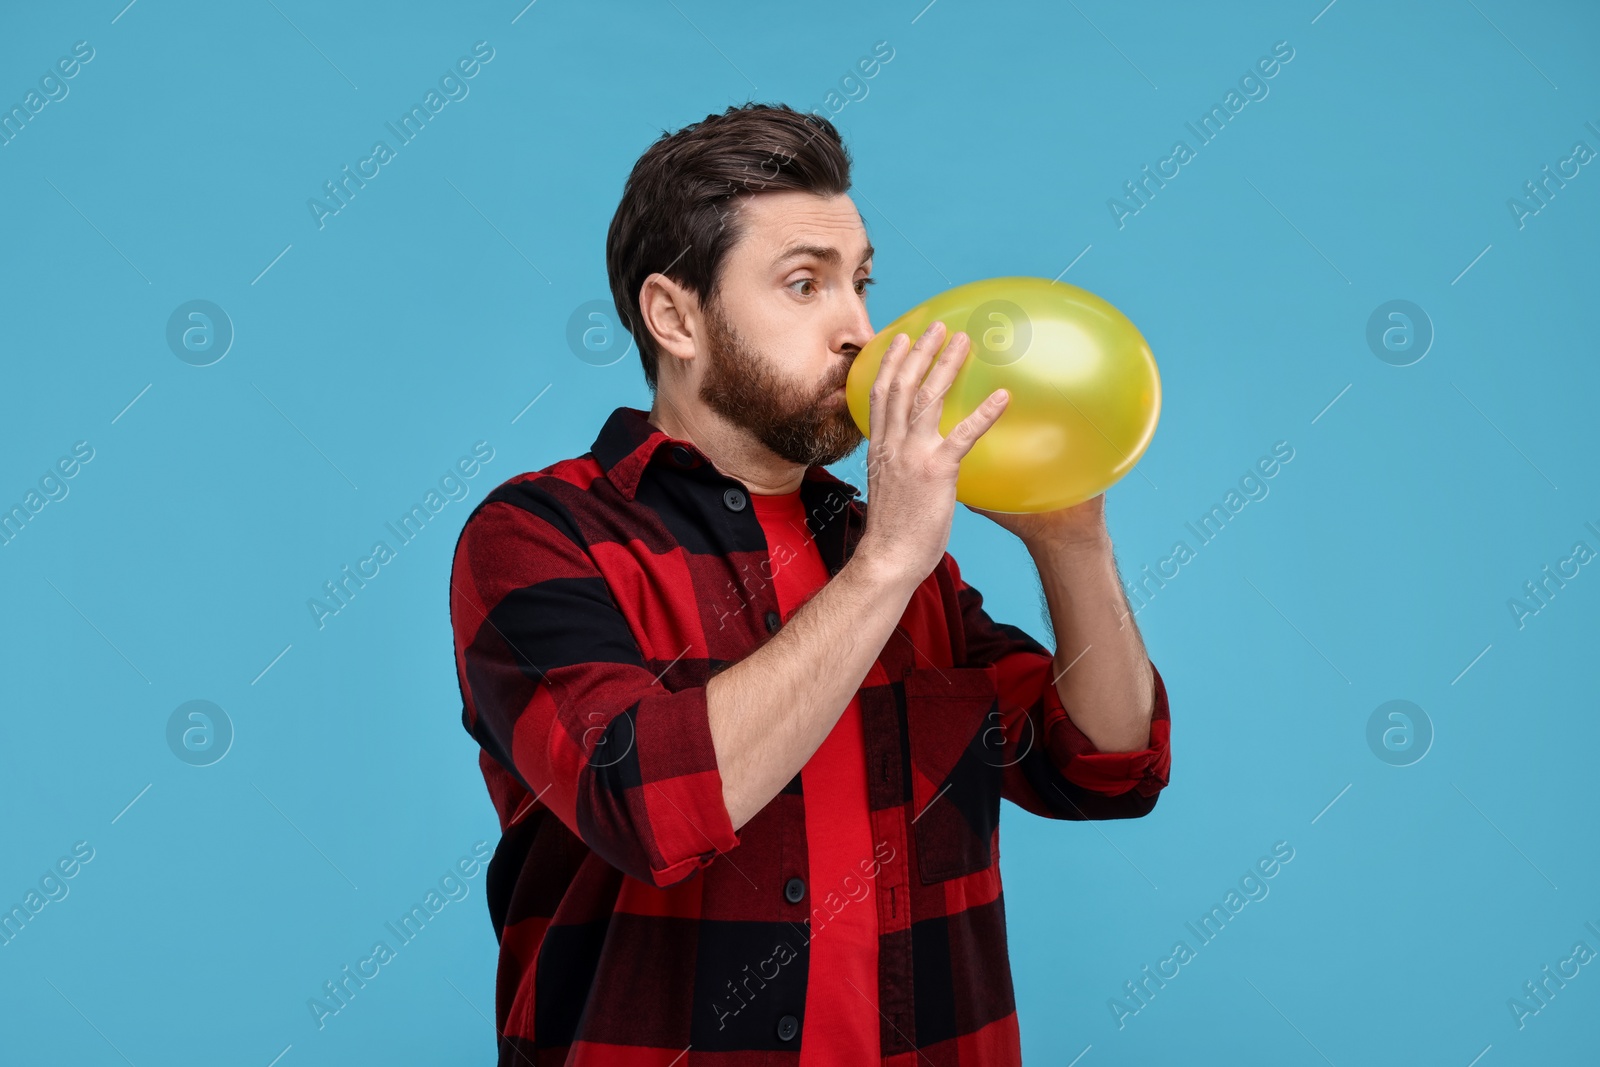 Photo of Man inflating yellow balloon on light blue background